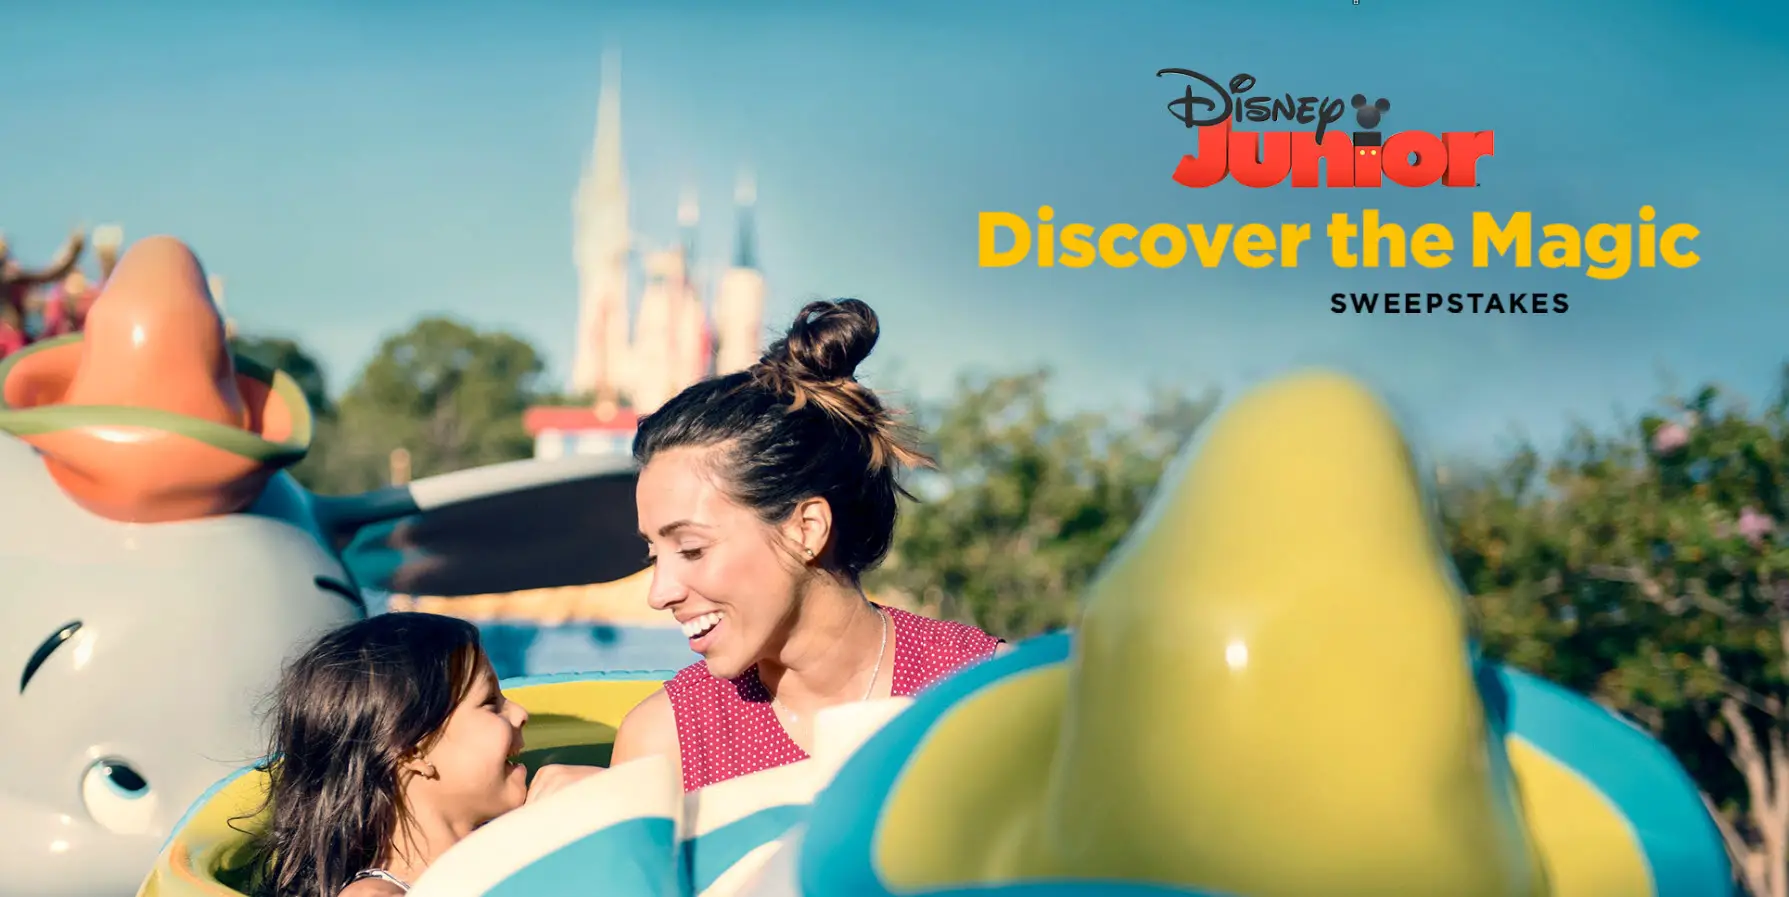 Enter the Disney Junior Discover The Magic Sweepstakes and you could win a magical vacation from Disney Junior!  #DisneyJunior